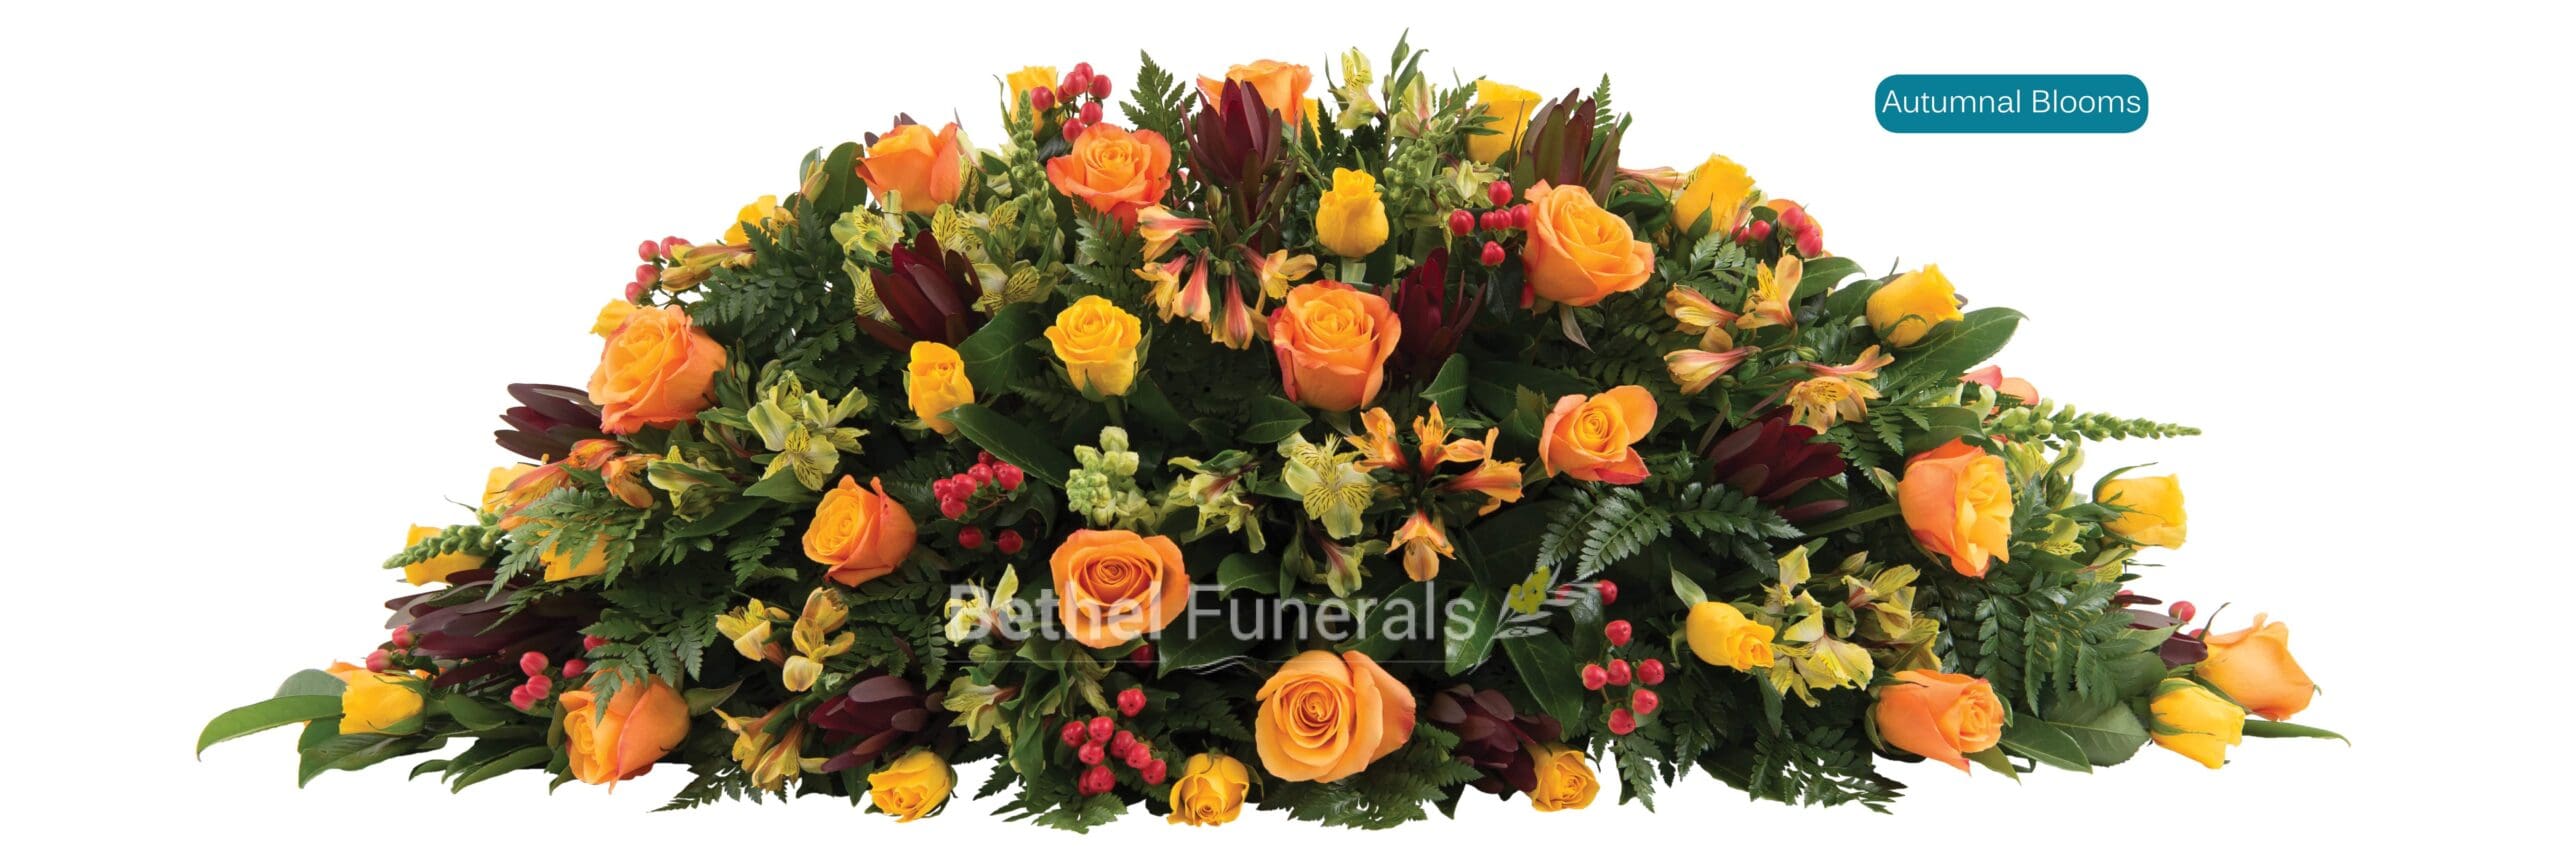 Autumnal Blooms funeral flowers